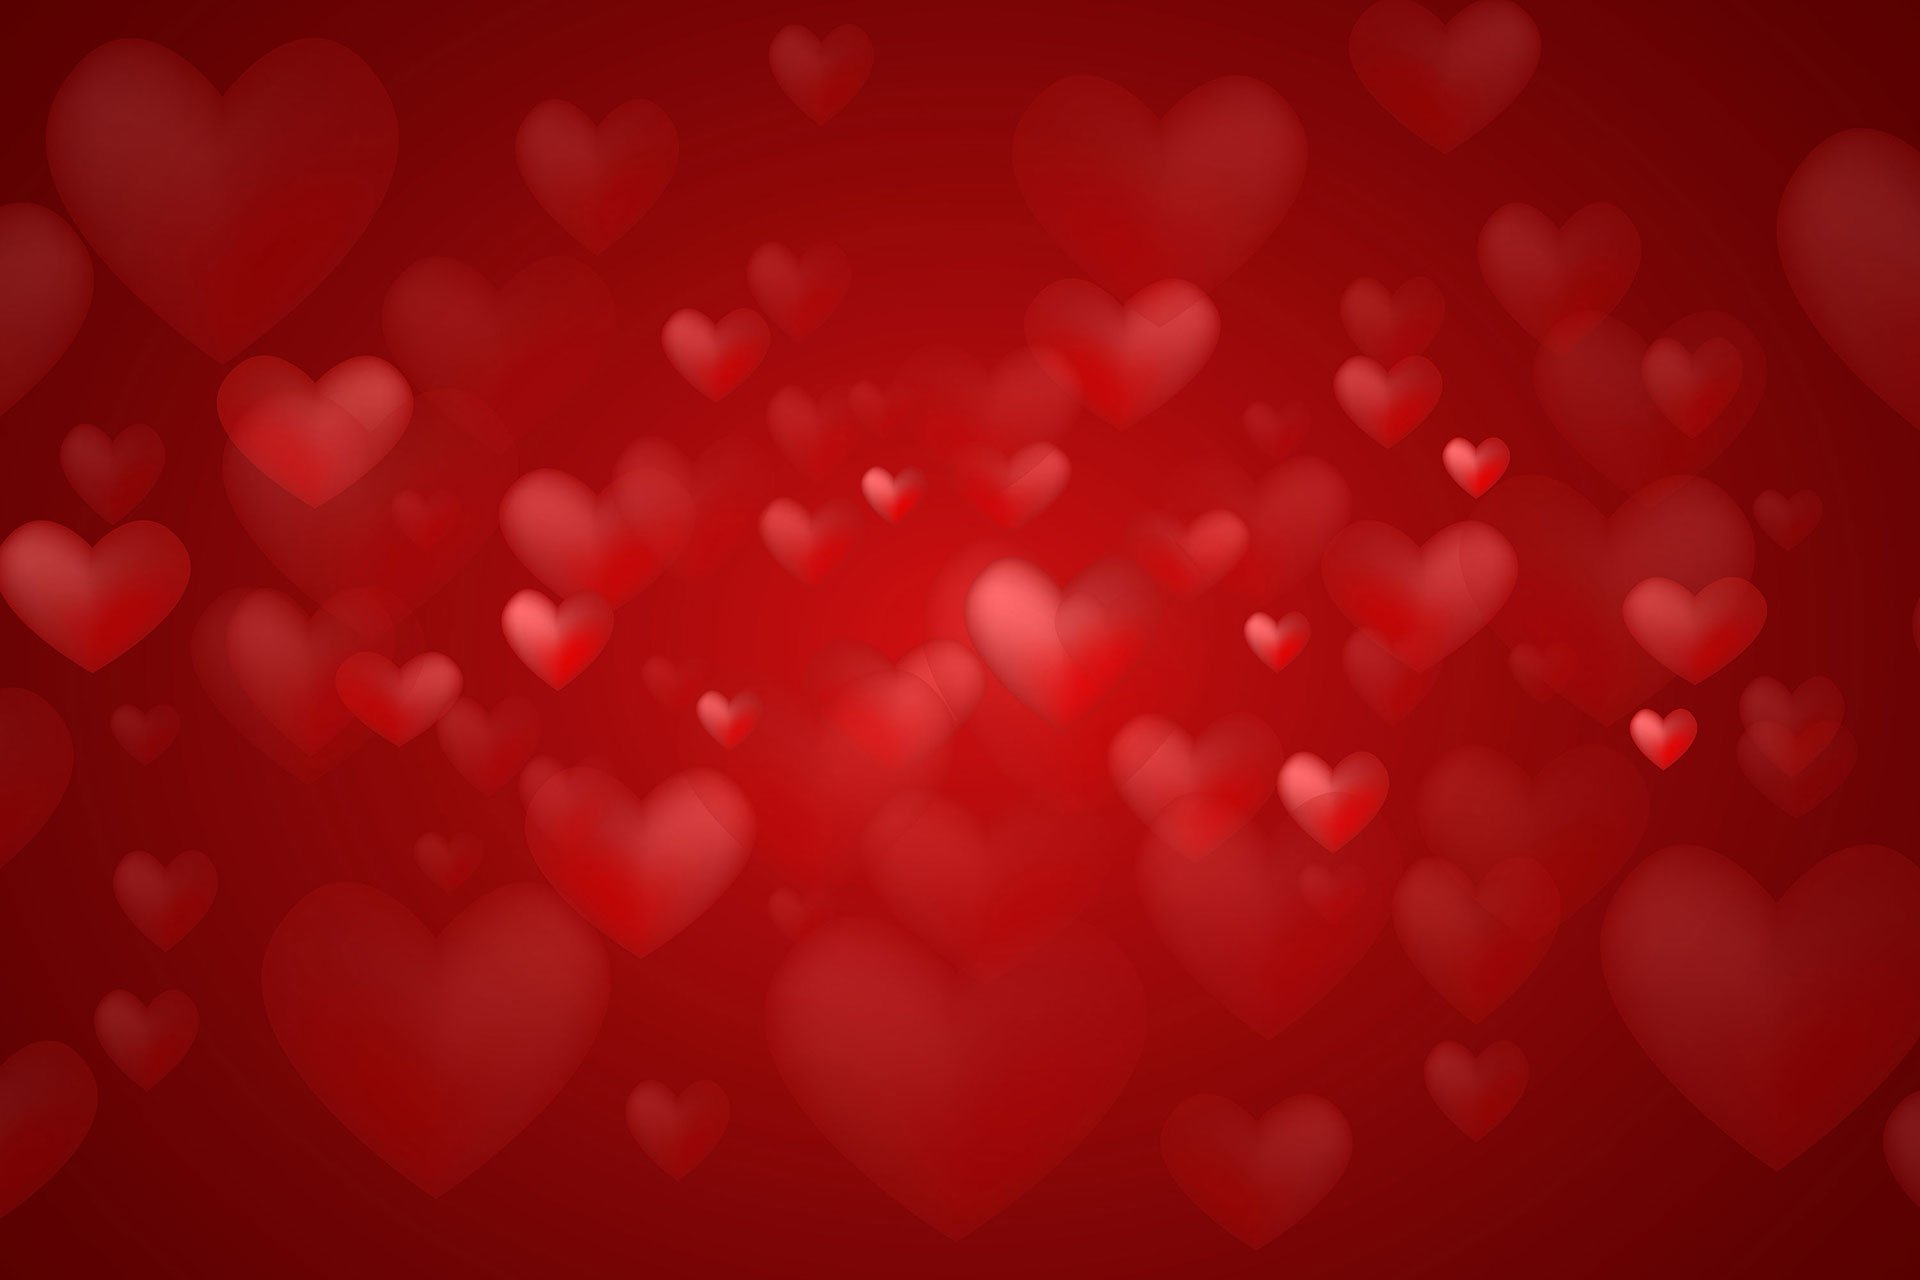 50+ Happy Valentine’s Day Wallpapers HD, Backgrounds & Pictures.